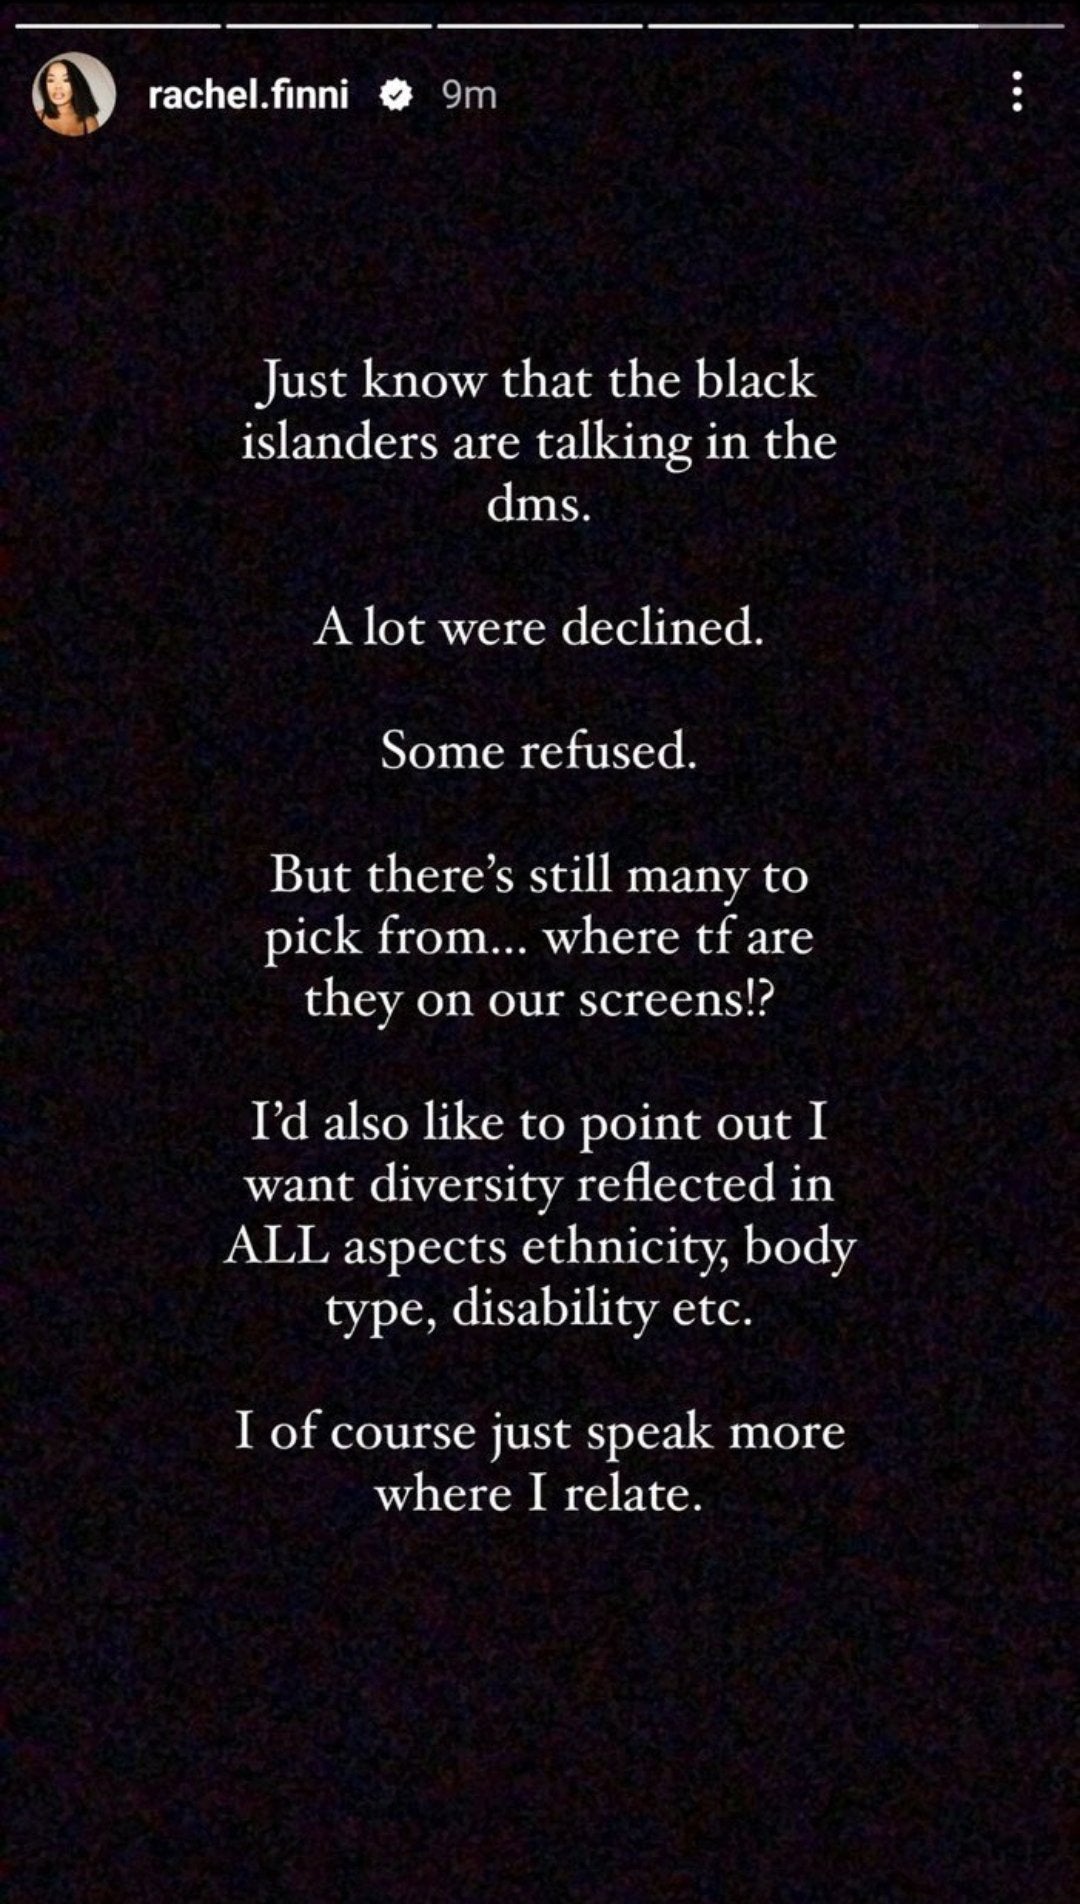 Former Islander Rachel Finni posted a message on Instagram within minutes of the dumping